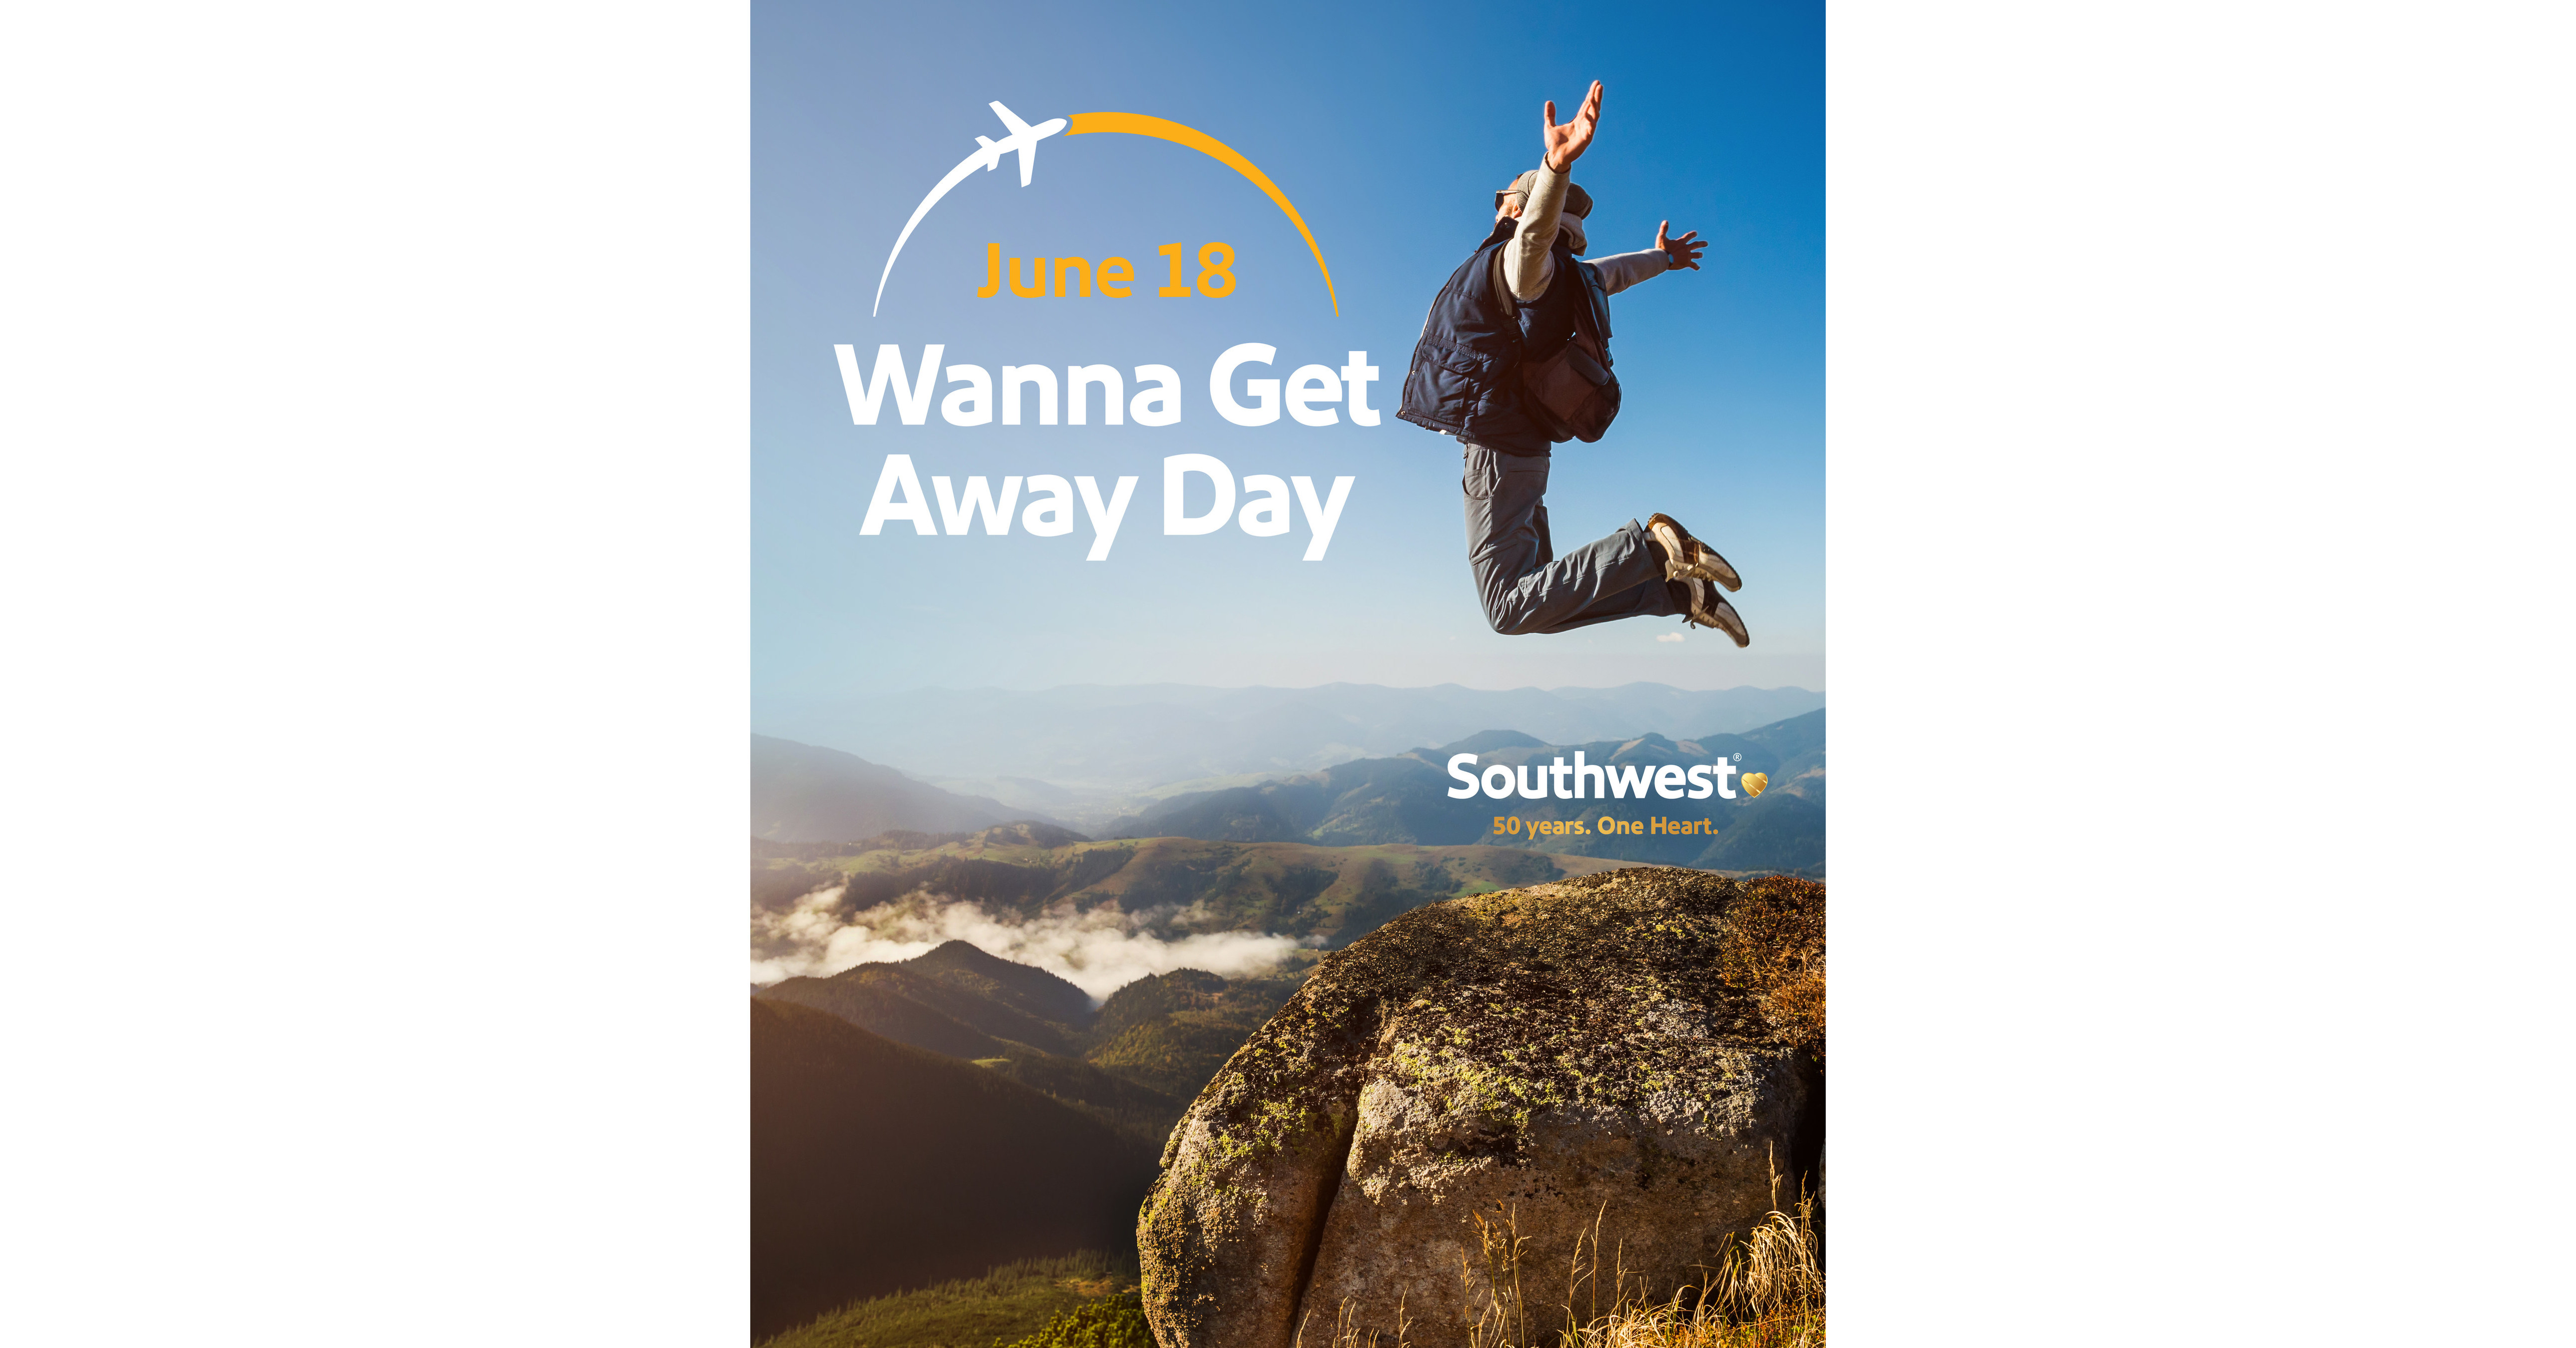 Southwest Airlines Declares June 18 As Wanna Get Away Day To Honor 50th